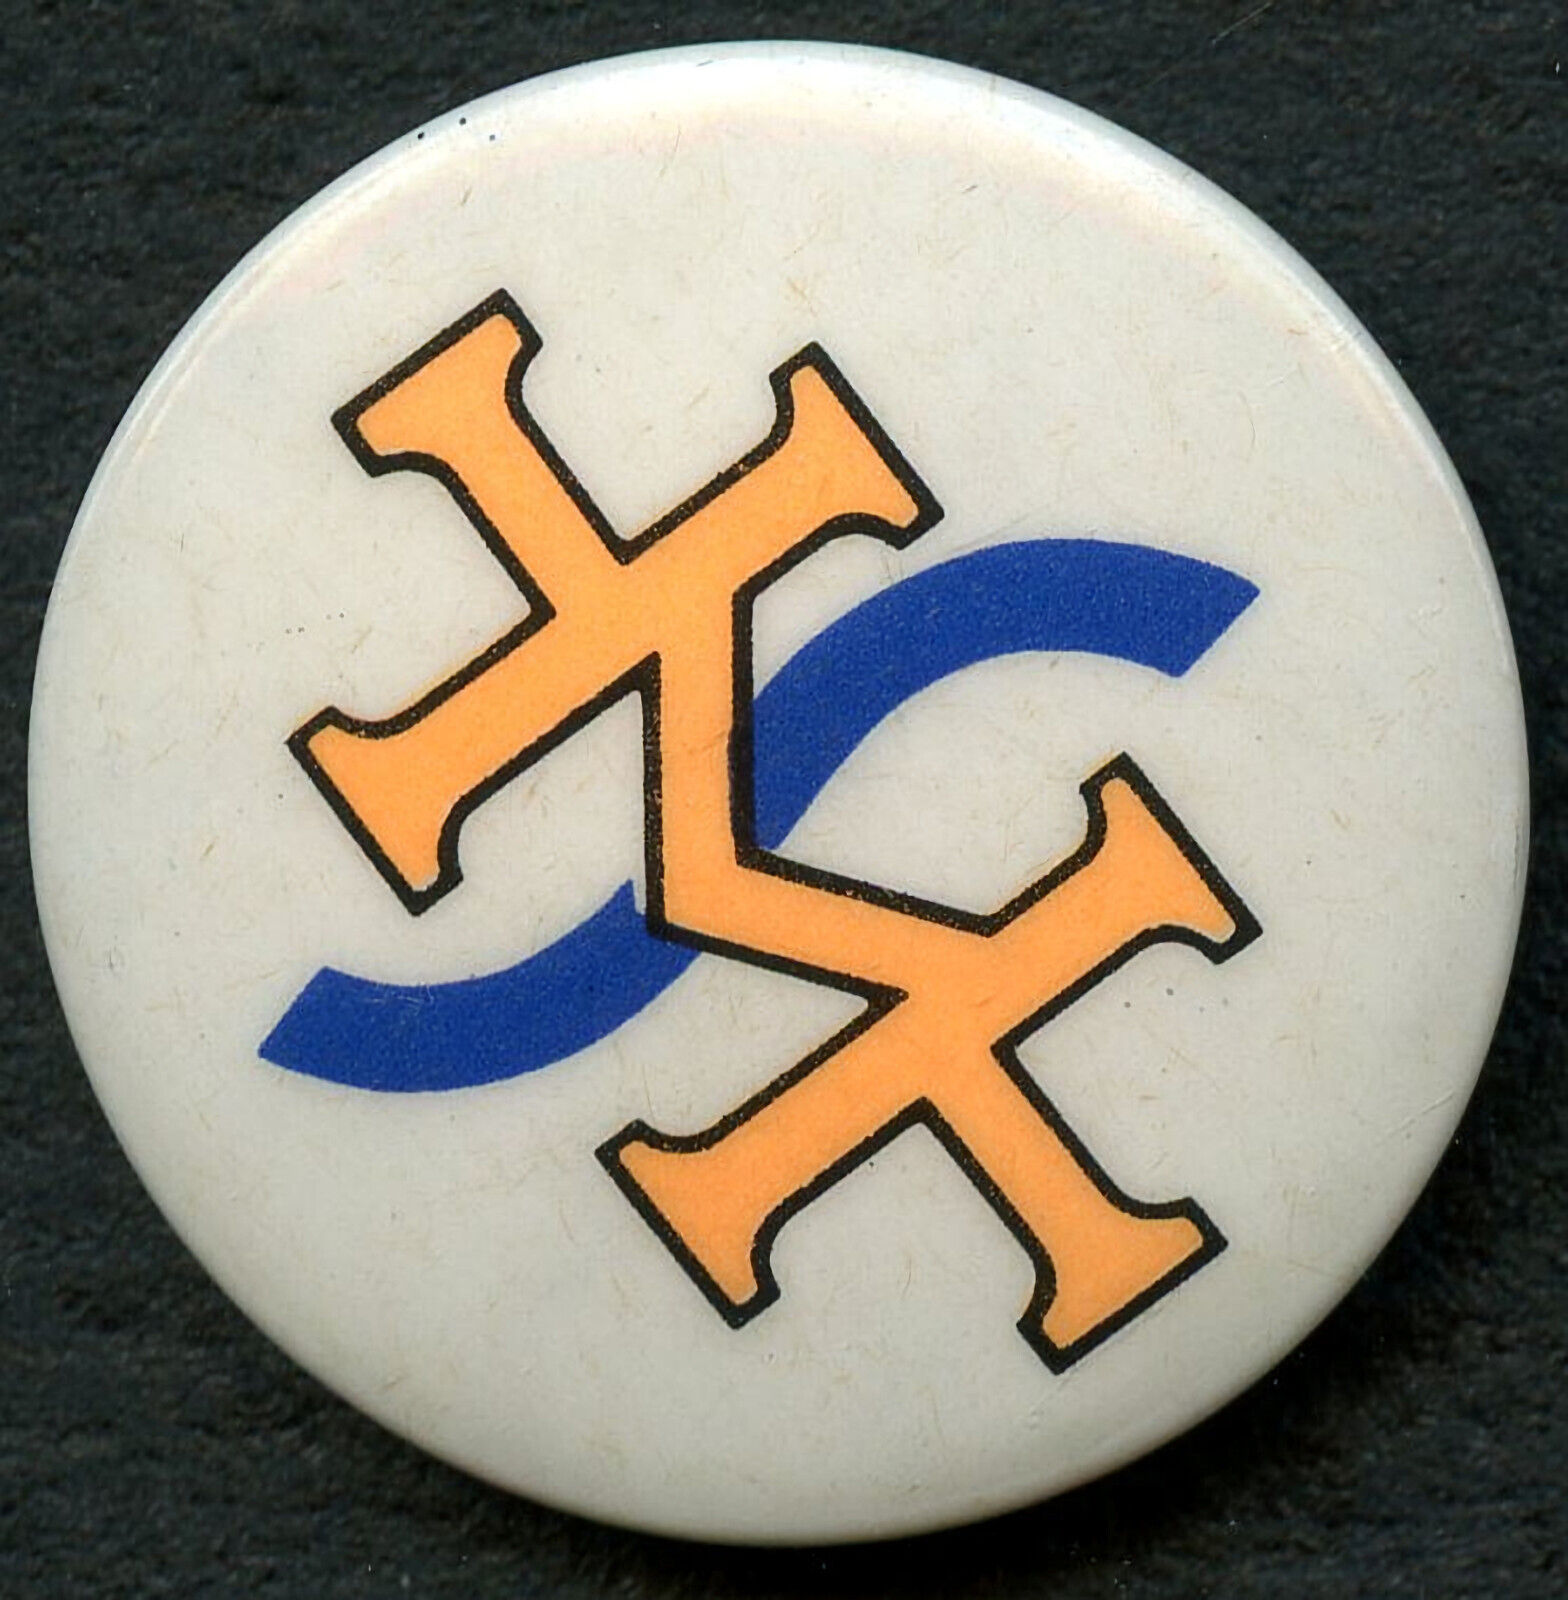 Original 1890s Symbol Pin Back Button Was It for a University? Club? Sport?